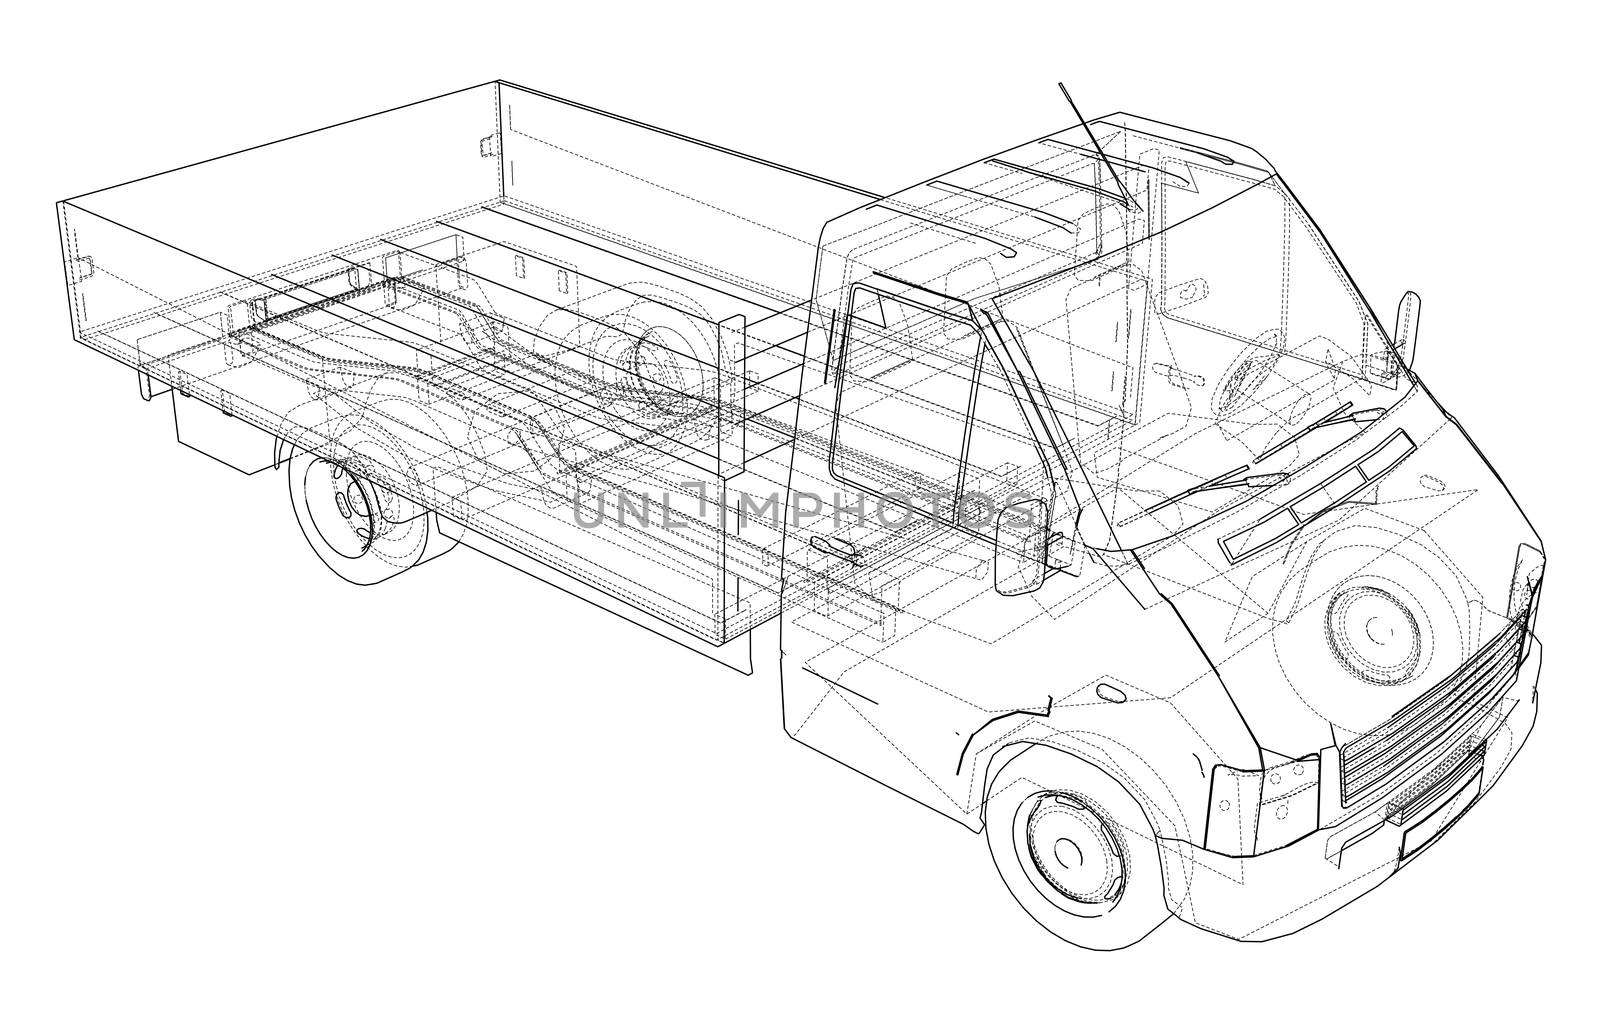 Concept small truck sketch. 3d illustration. Wire-frame style